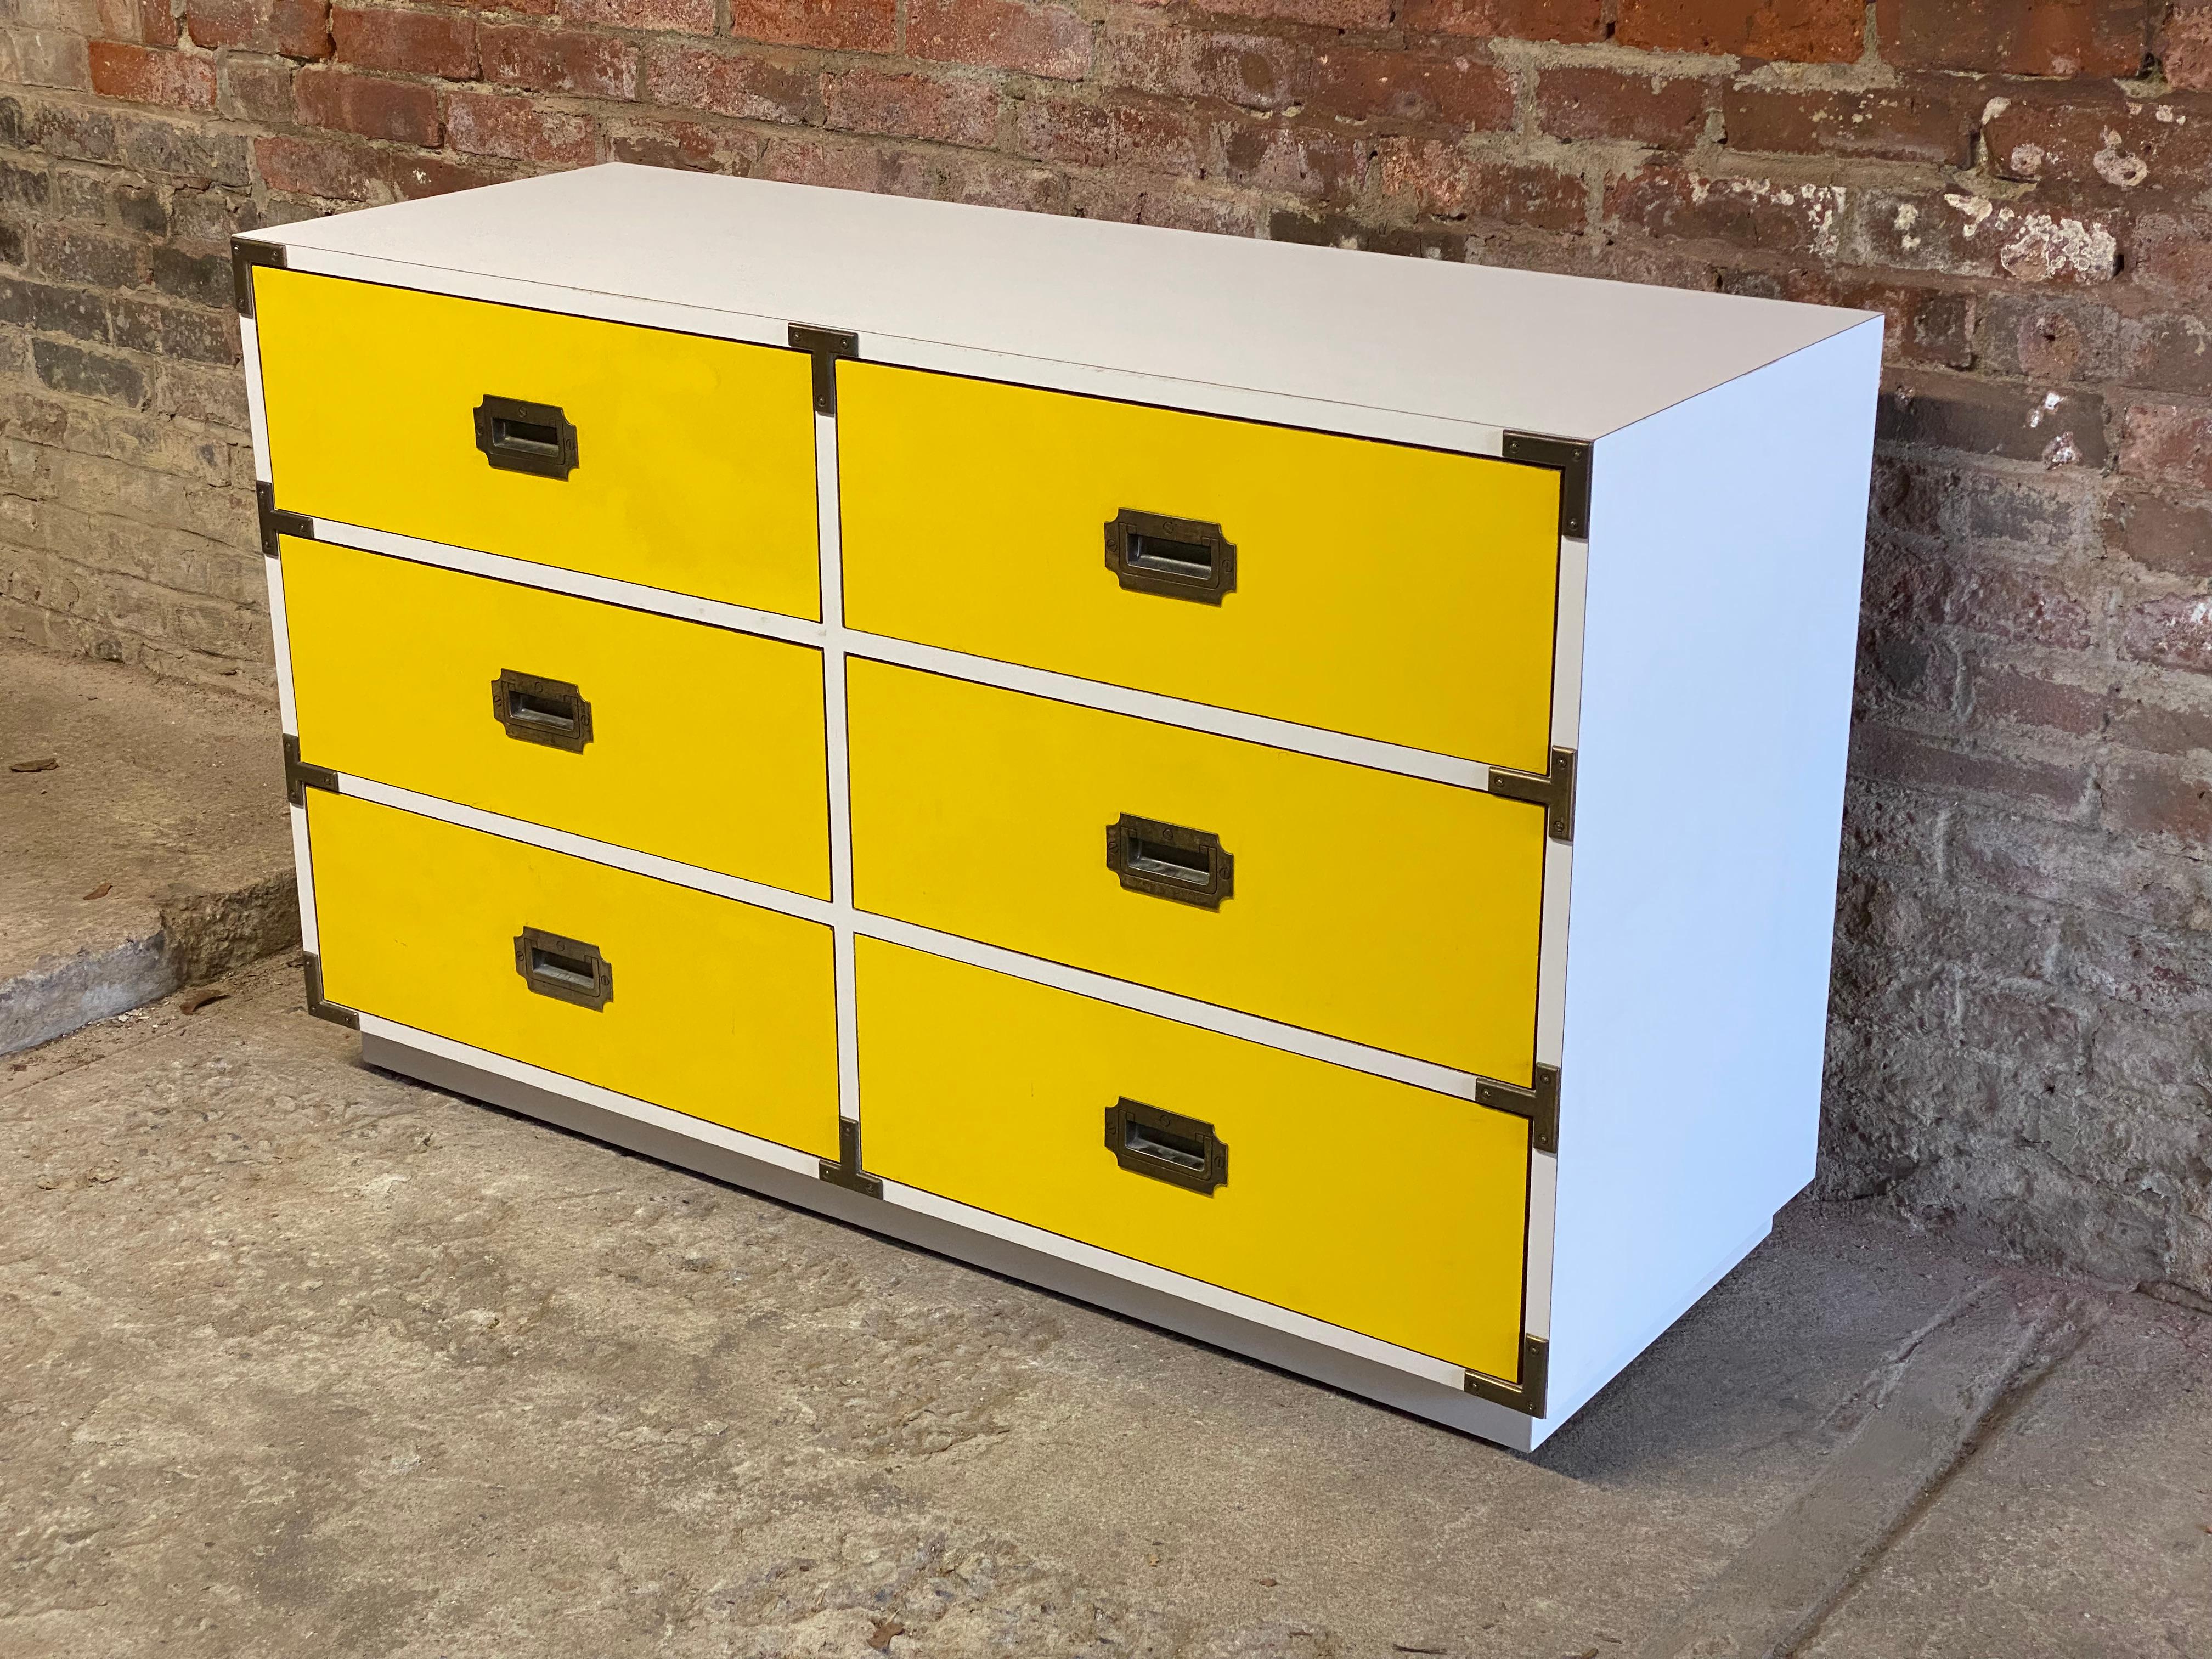 A distinct statement Colormates Campaign style dresser by Morris of California. Bright canary yellow laminate drawers with a white laminate case. Six spacious drawers with metal details. Recessed drawer hardware. Circa late 1960s-early 1970s.